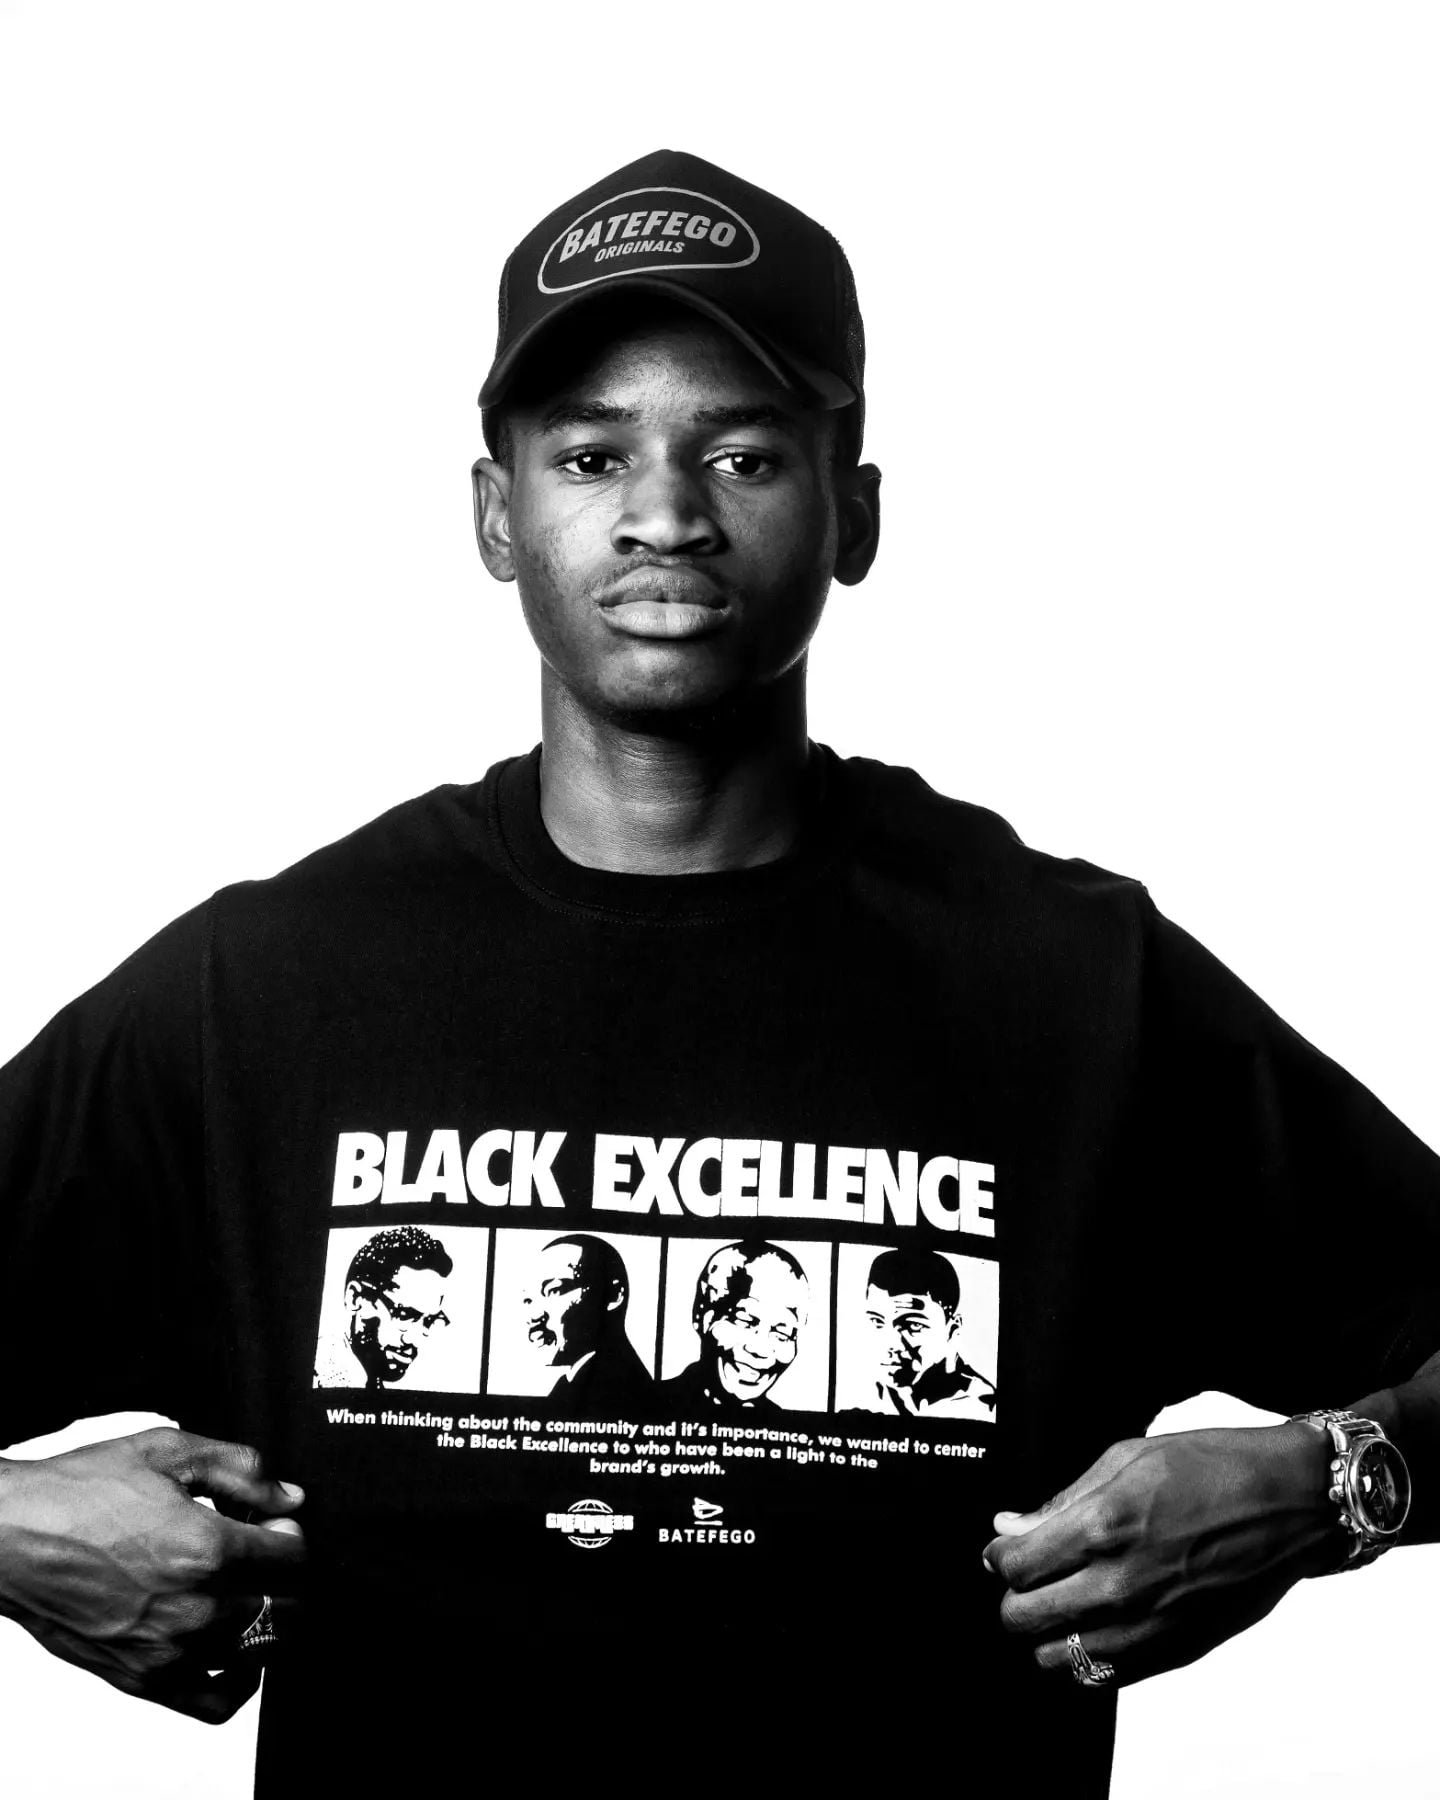 Black Excellence Tshirt (Batefego x Greatness)